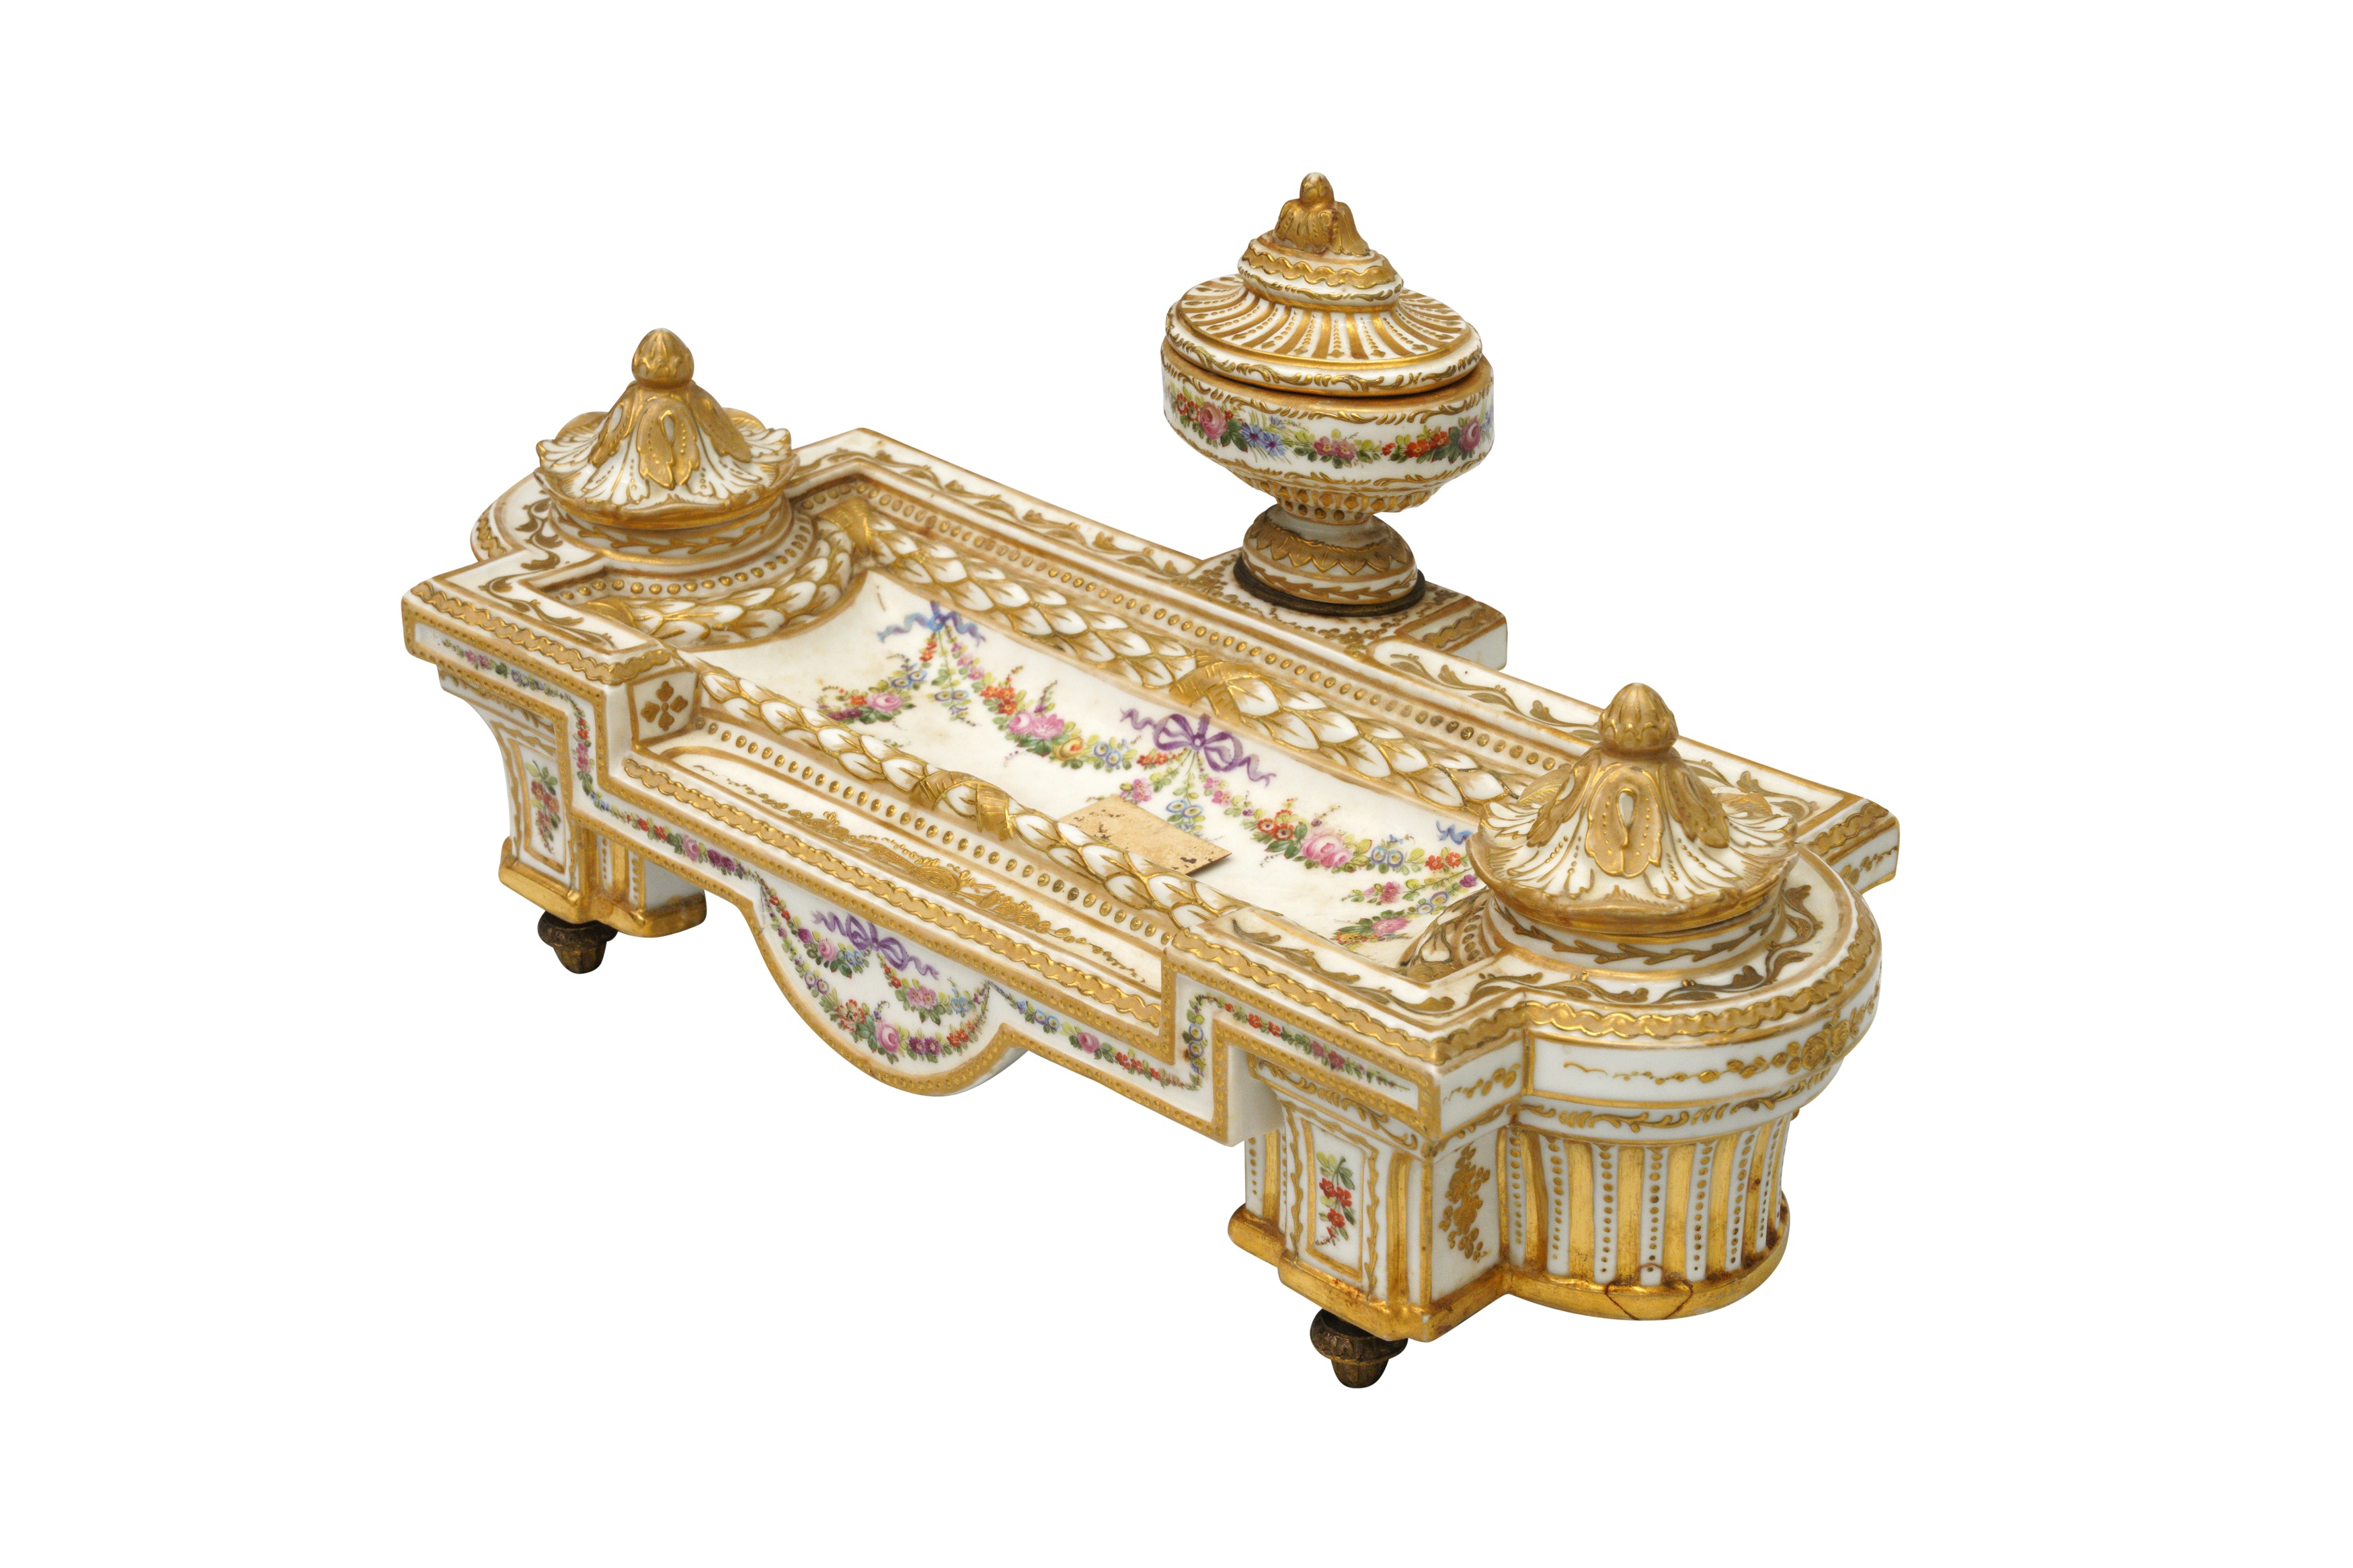 A FRENCH PARIS PORCELAIN PEN TRAY OF NEOCLASSICAL DESIGN, LATE 19TH CENTURY - Image 2 of 22